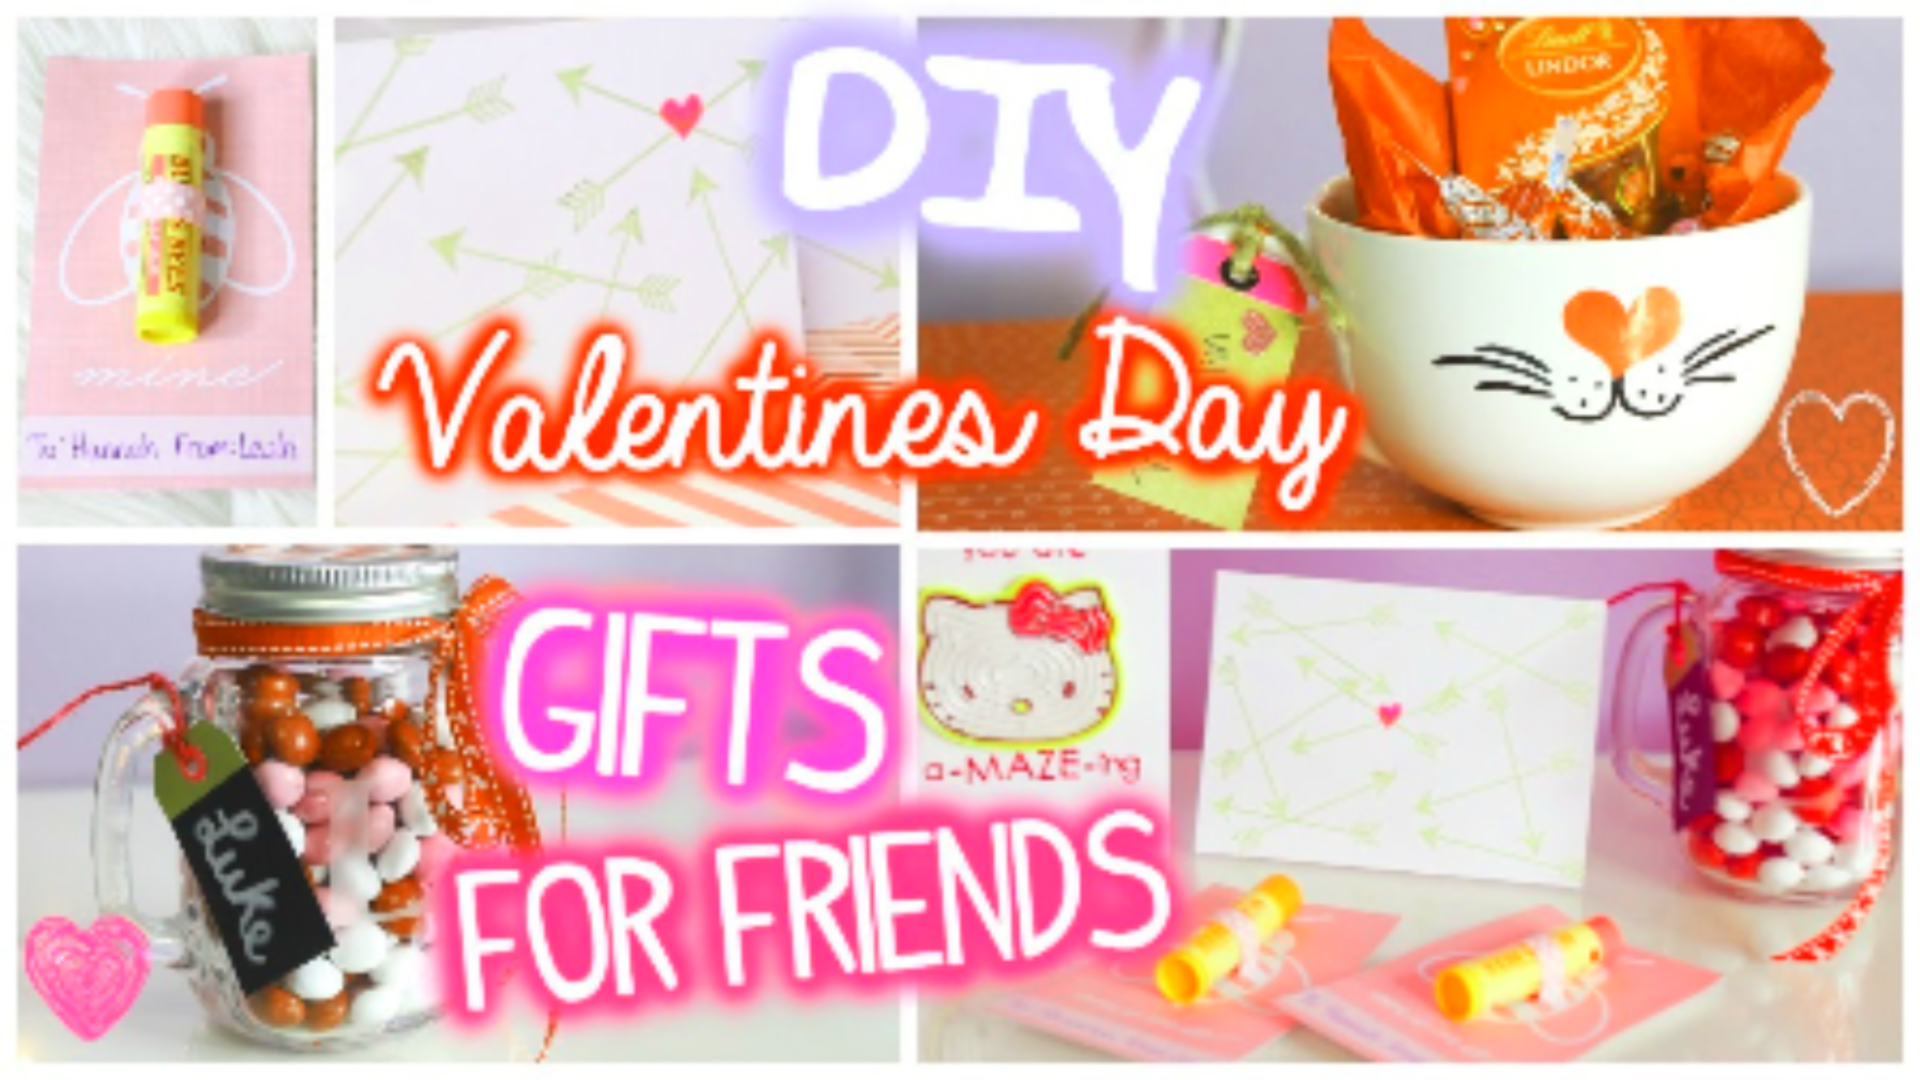 Valentines Day Gifts For Friends - Top 21 Picks for Your Bestie